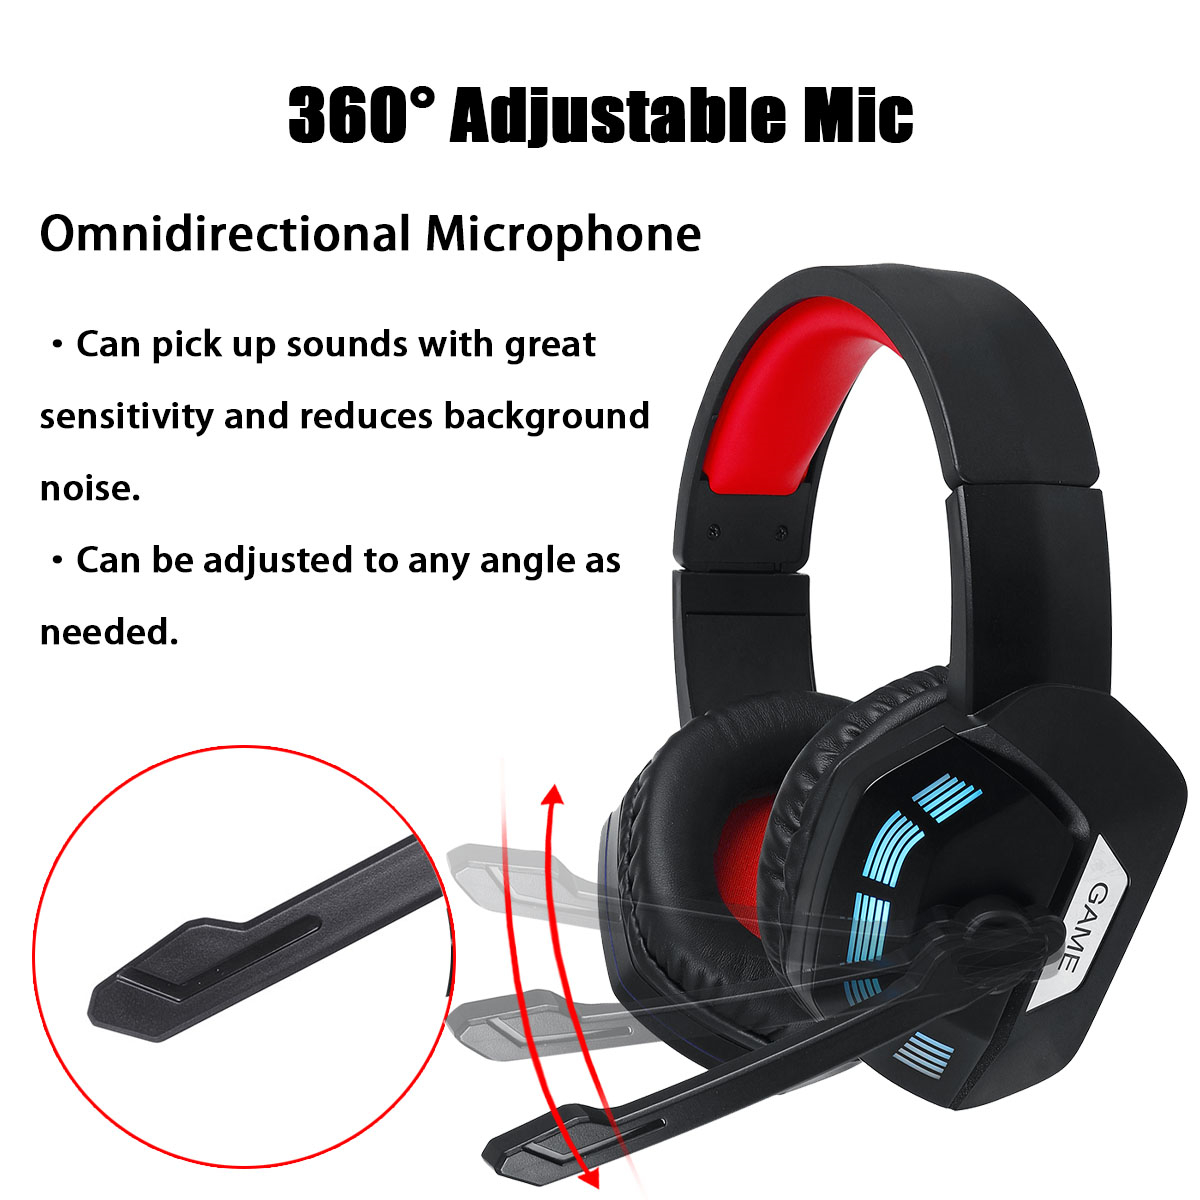 M1-Gaming-Headset-Surround-Sound-Music-Earphones-USB-71--35mm-Wired-RGB-Backlight-Game-Headphones-wi-1827492-14